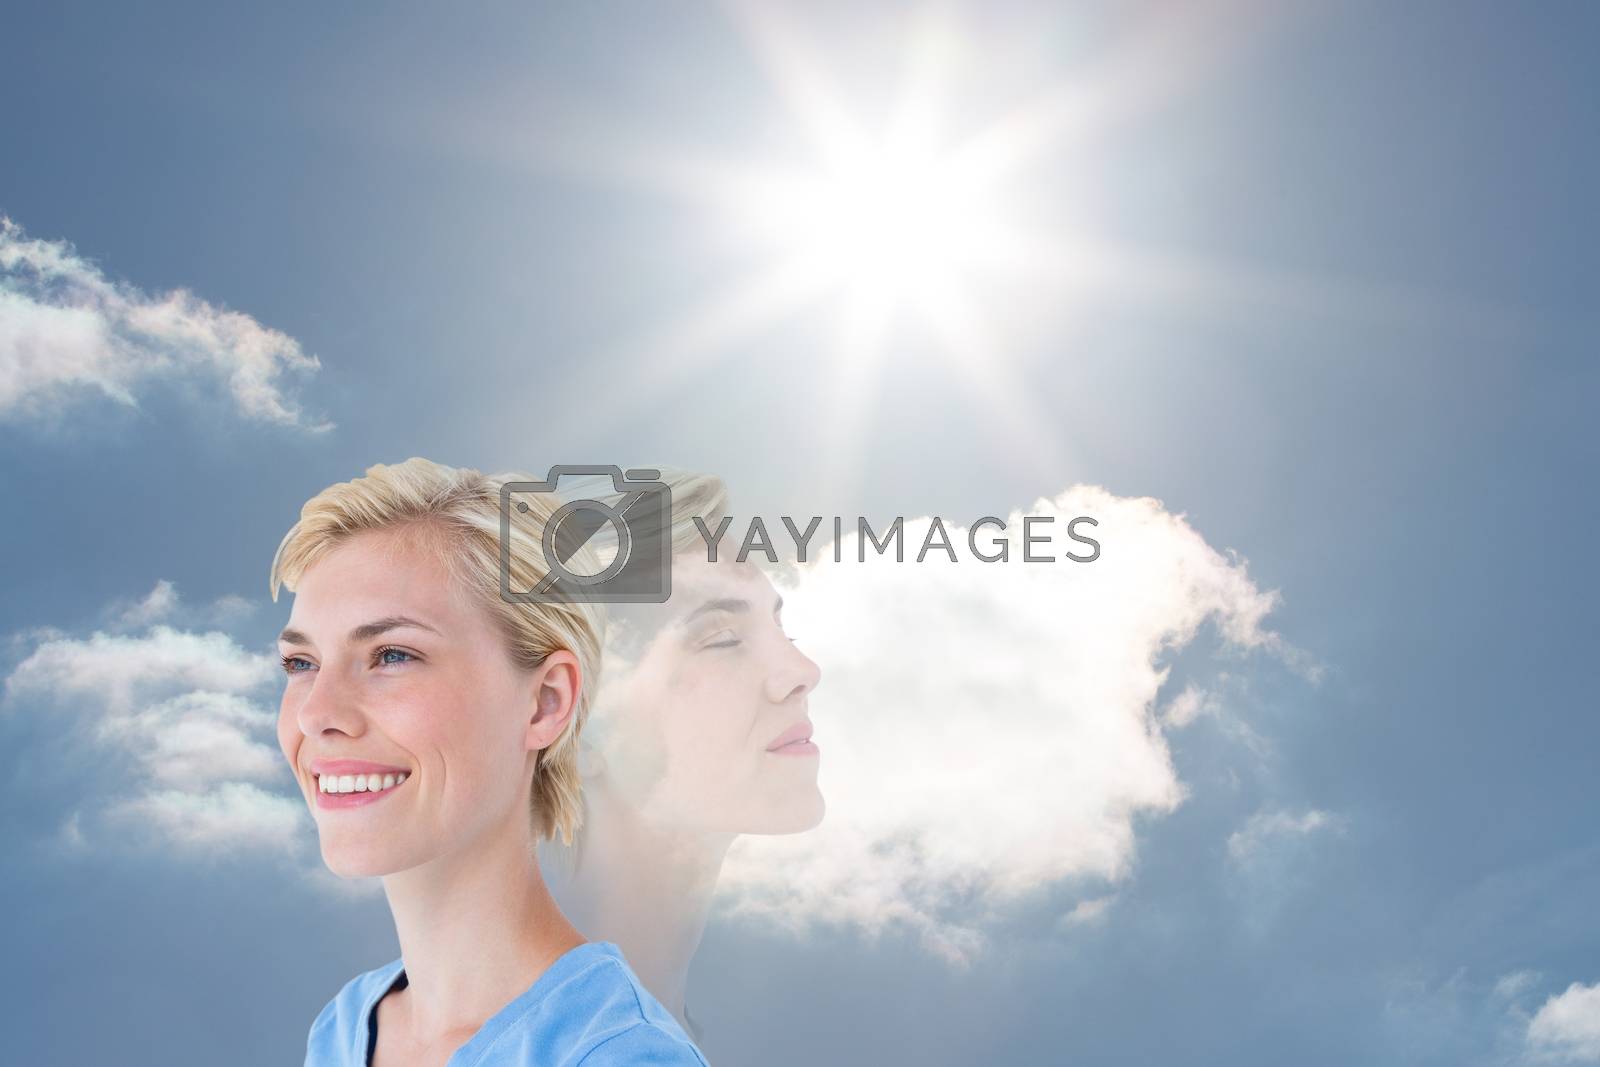 Royalty free image of Focus on smiling womans face by Wavebreakmedia